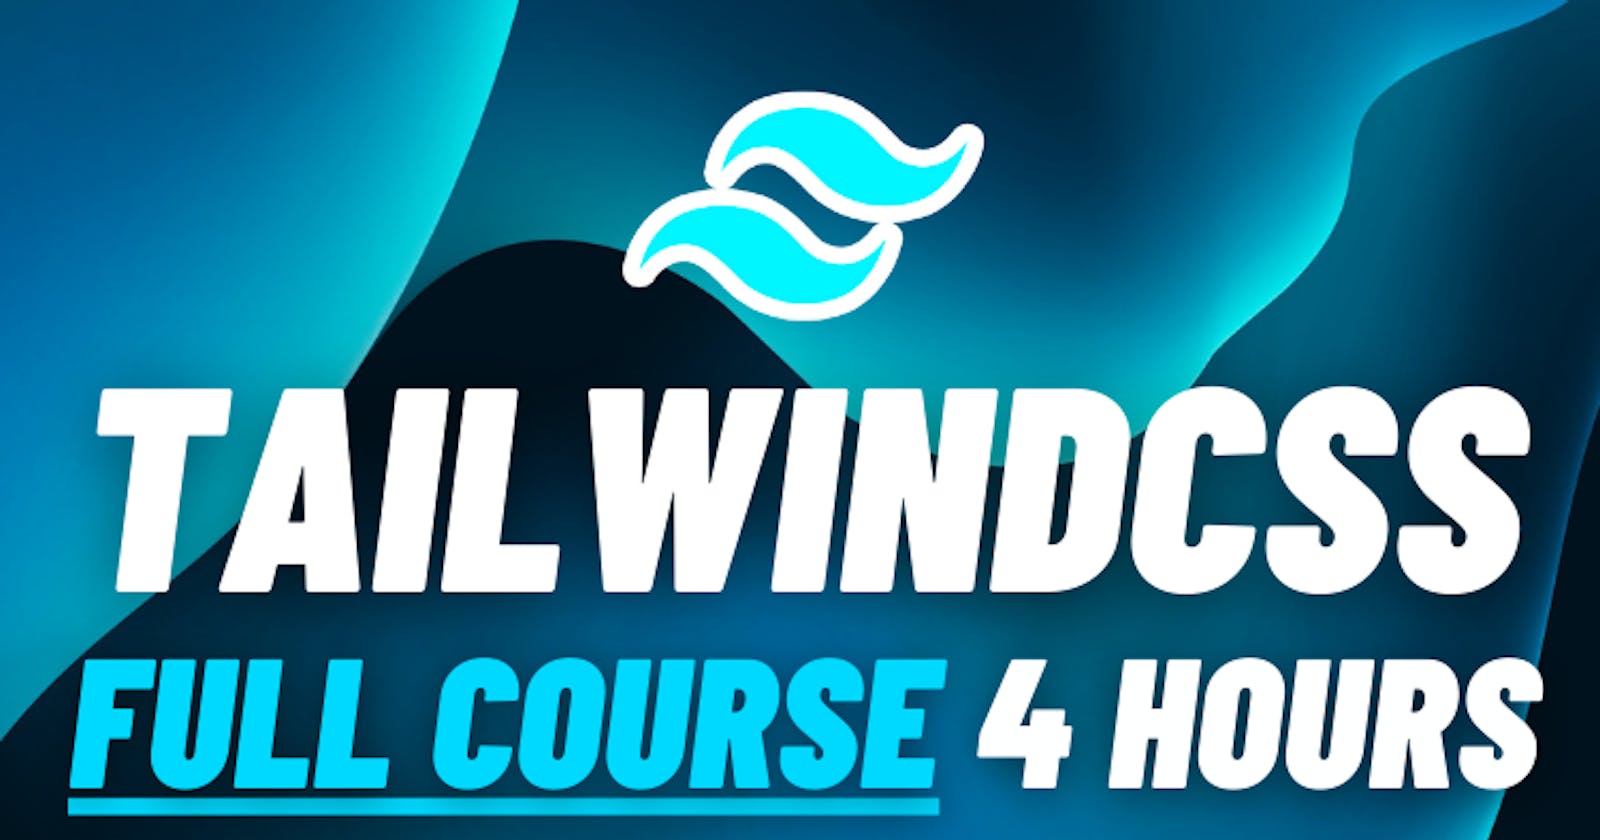 Learn Tailwindcss - full course for beginners of 4 hours